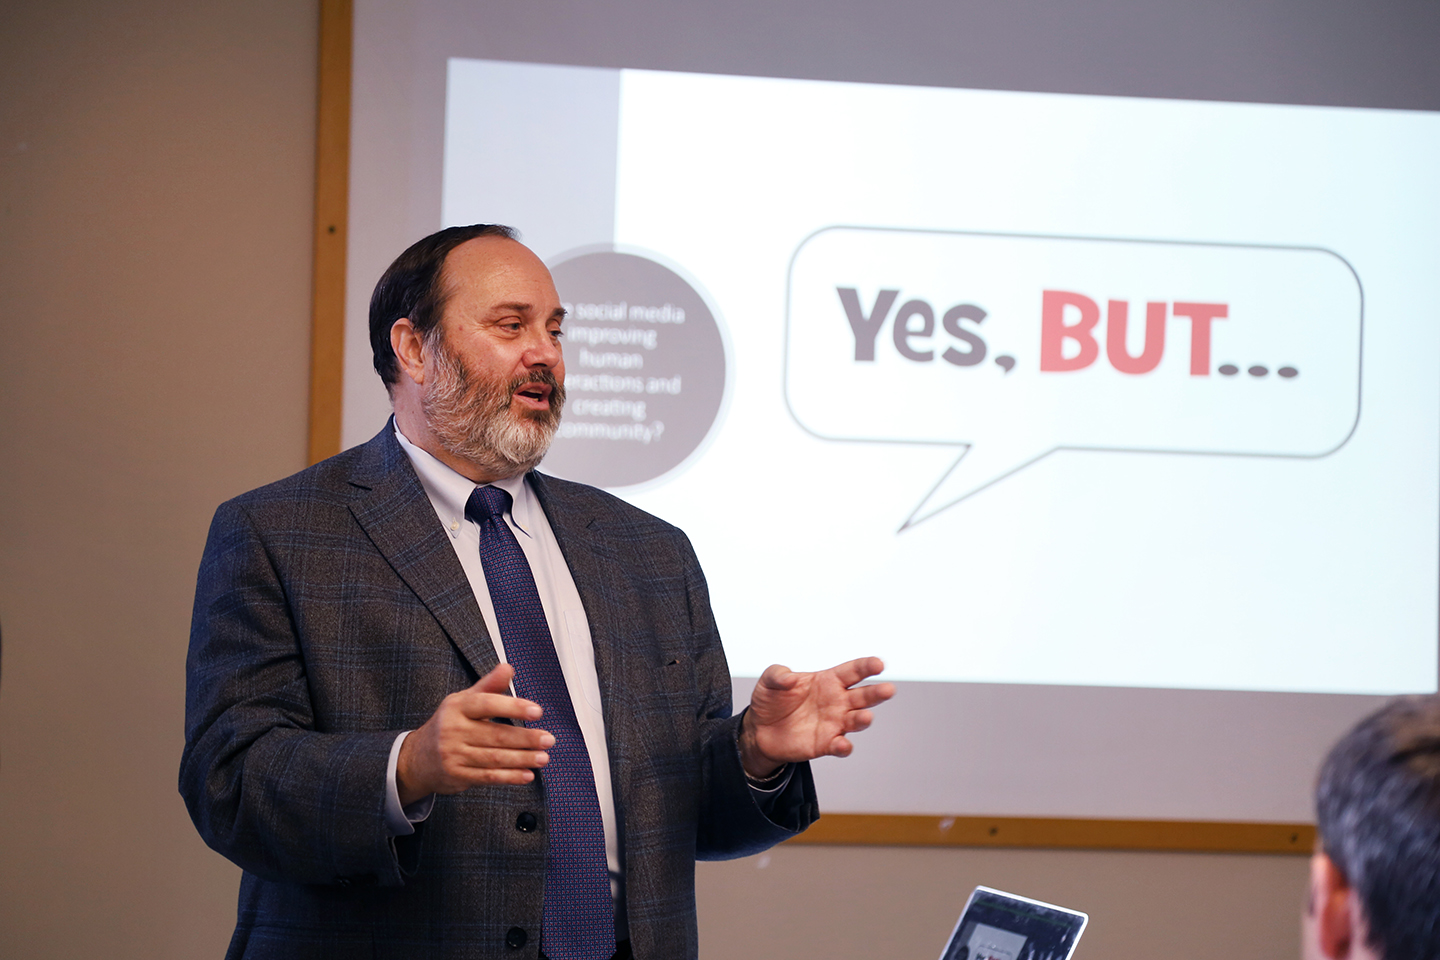 Robert Picard presents in 172 Hamilton Hall with a Powerpoint slide on the screen that says "Yes, But" behind him